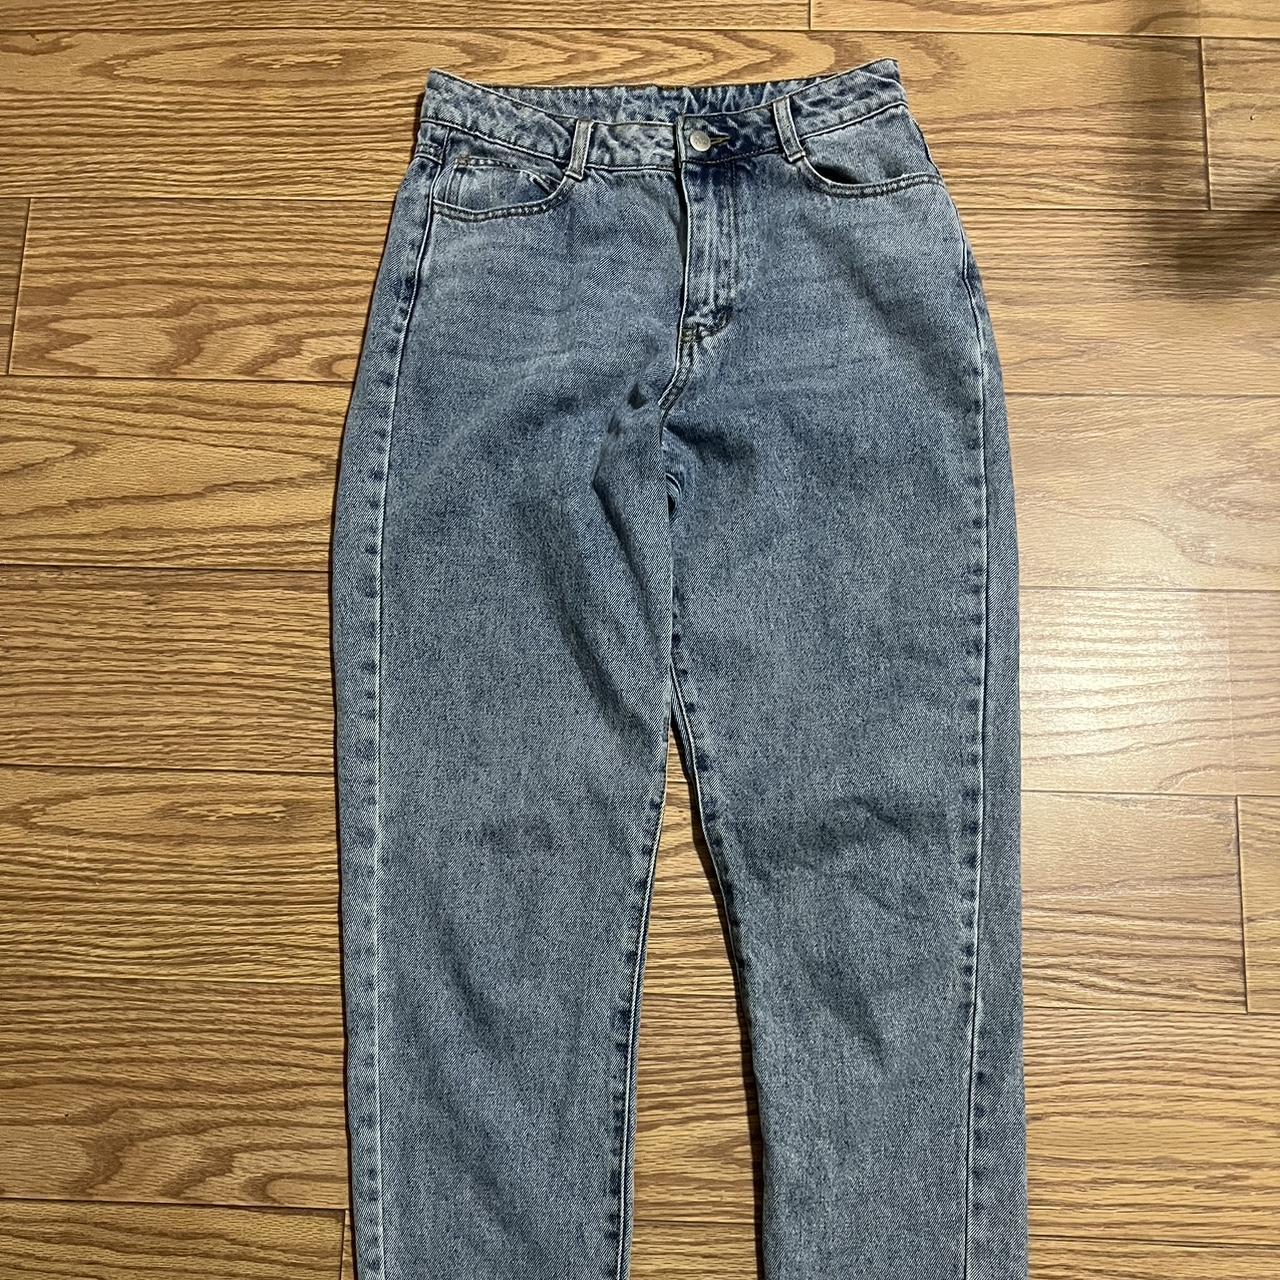 Bongo x Forever 21 retro style jeans - size 27. In... - Depop